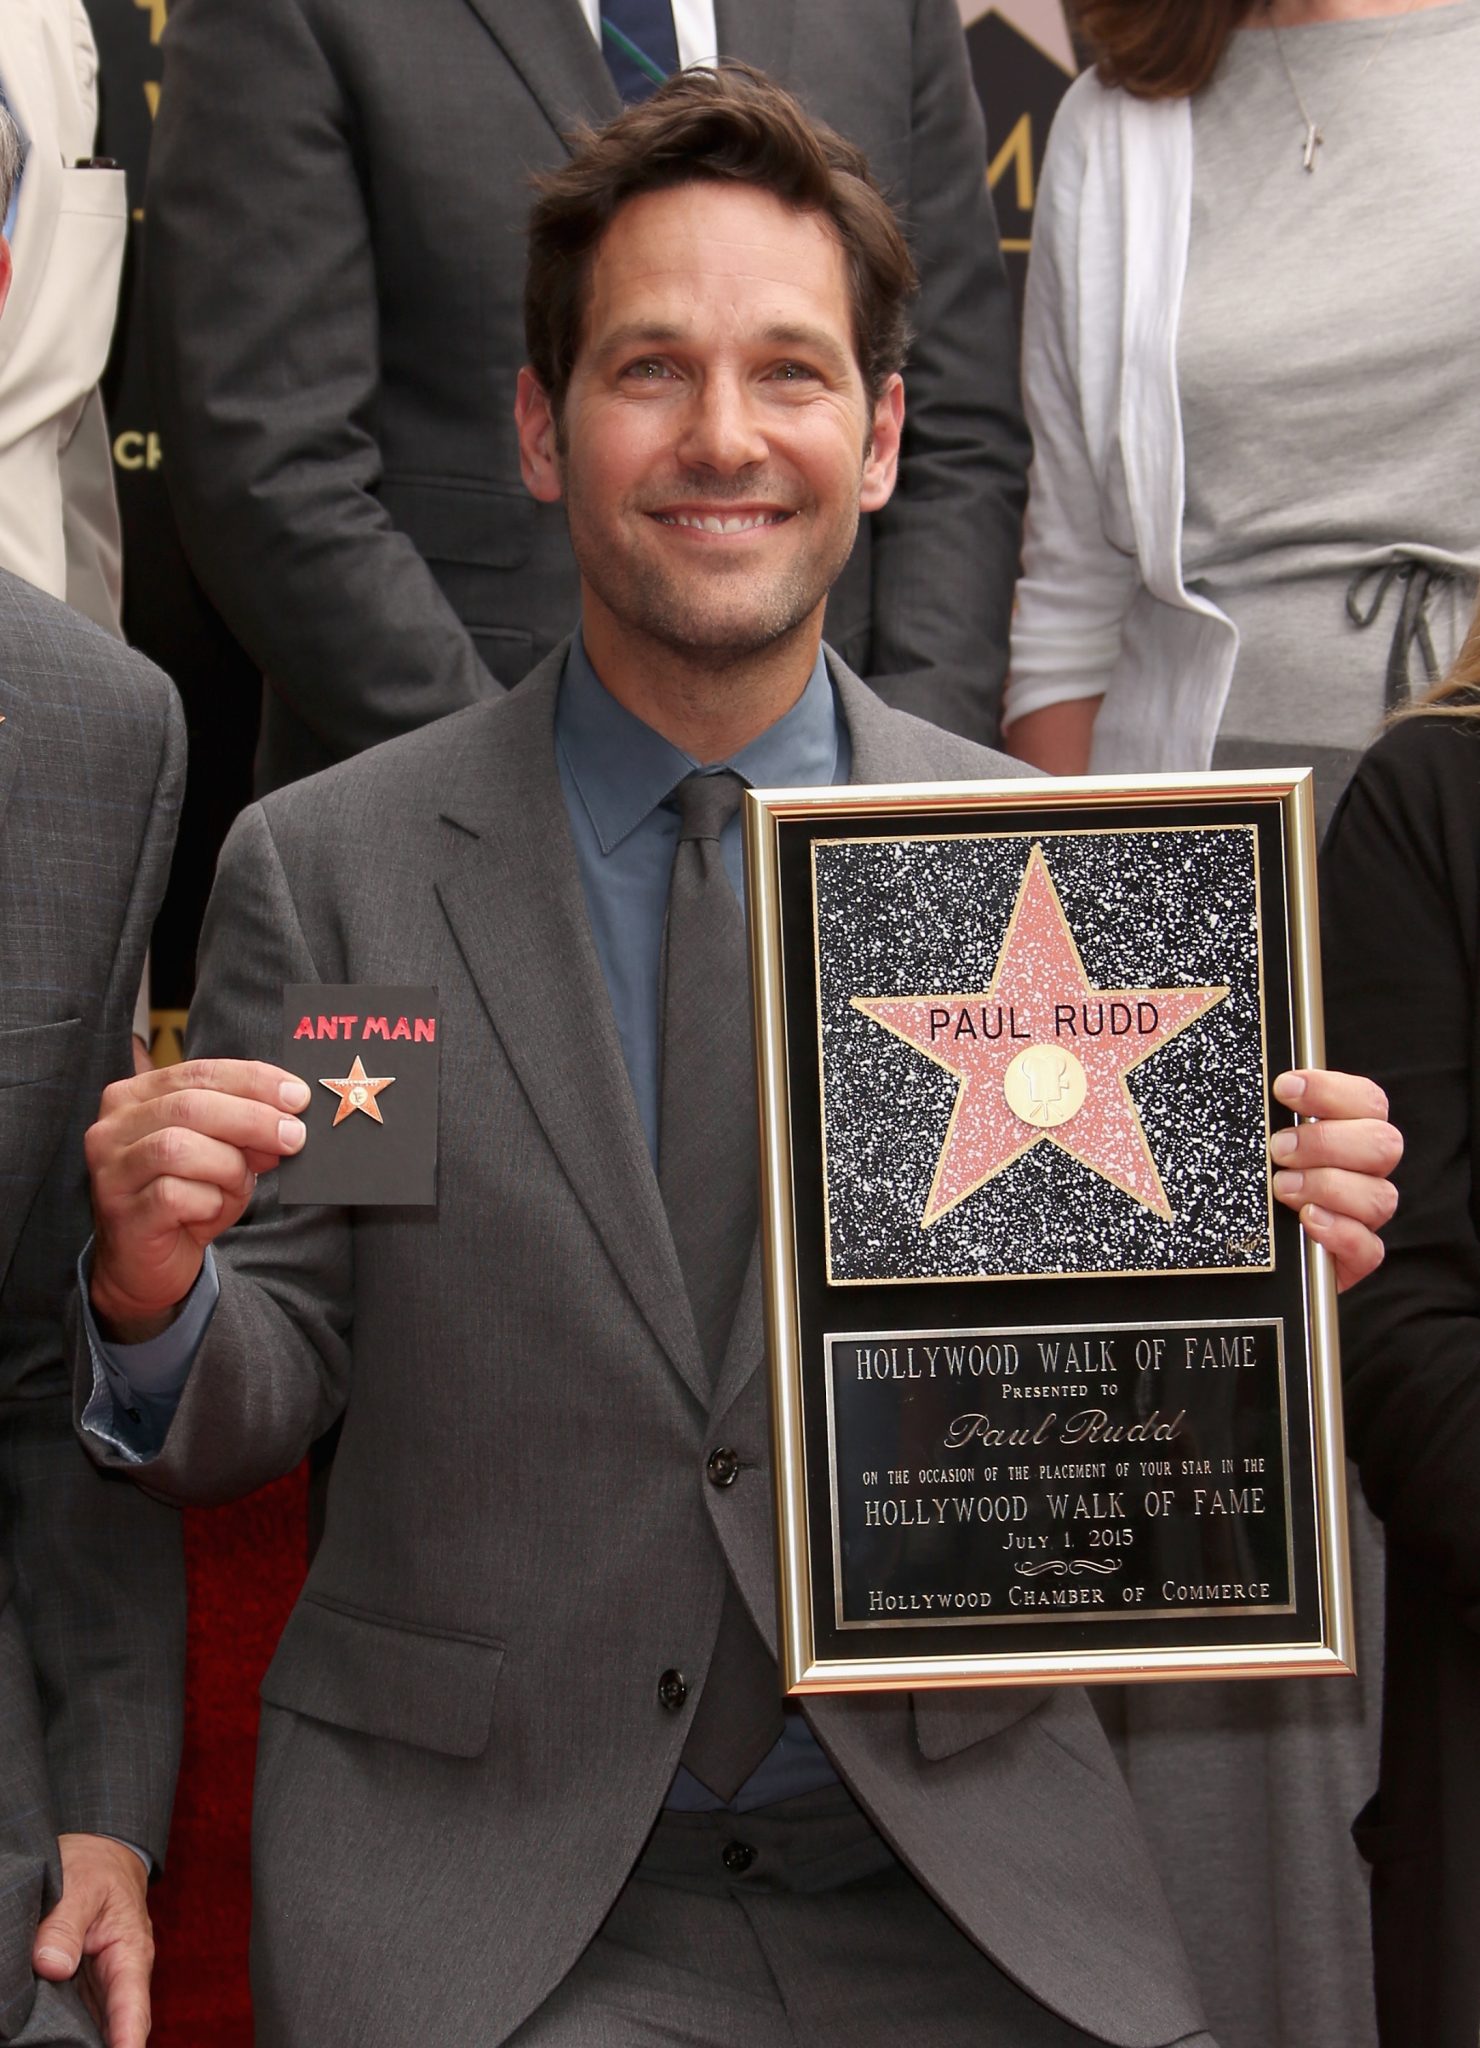 “Ant-Man’s” Paul Rudd Gets Star on Hollywood Walk of Fame